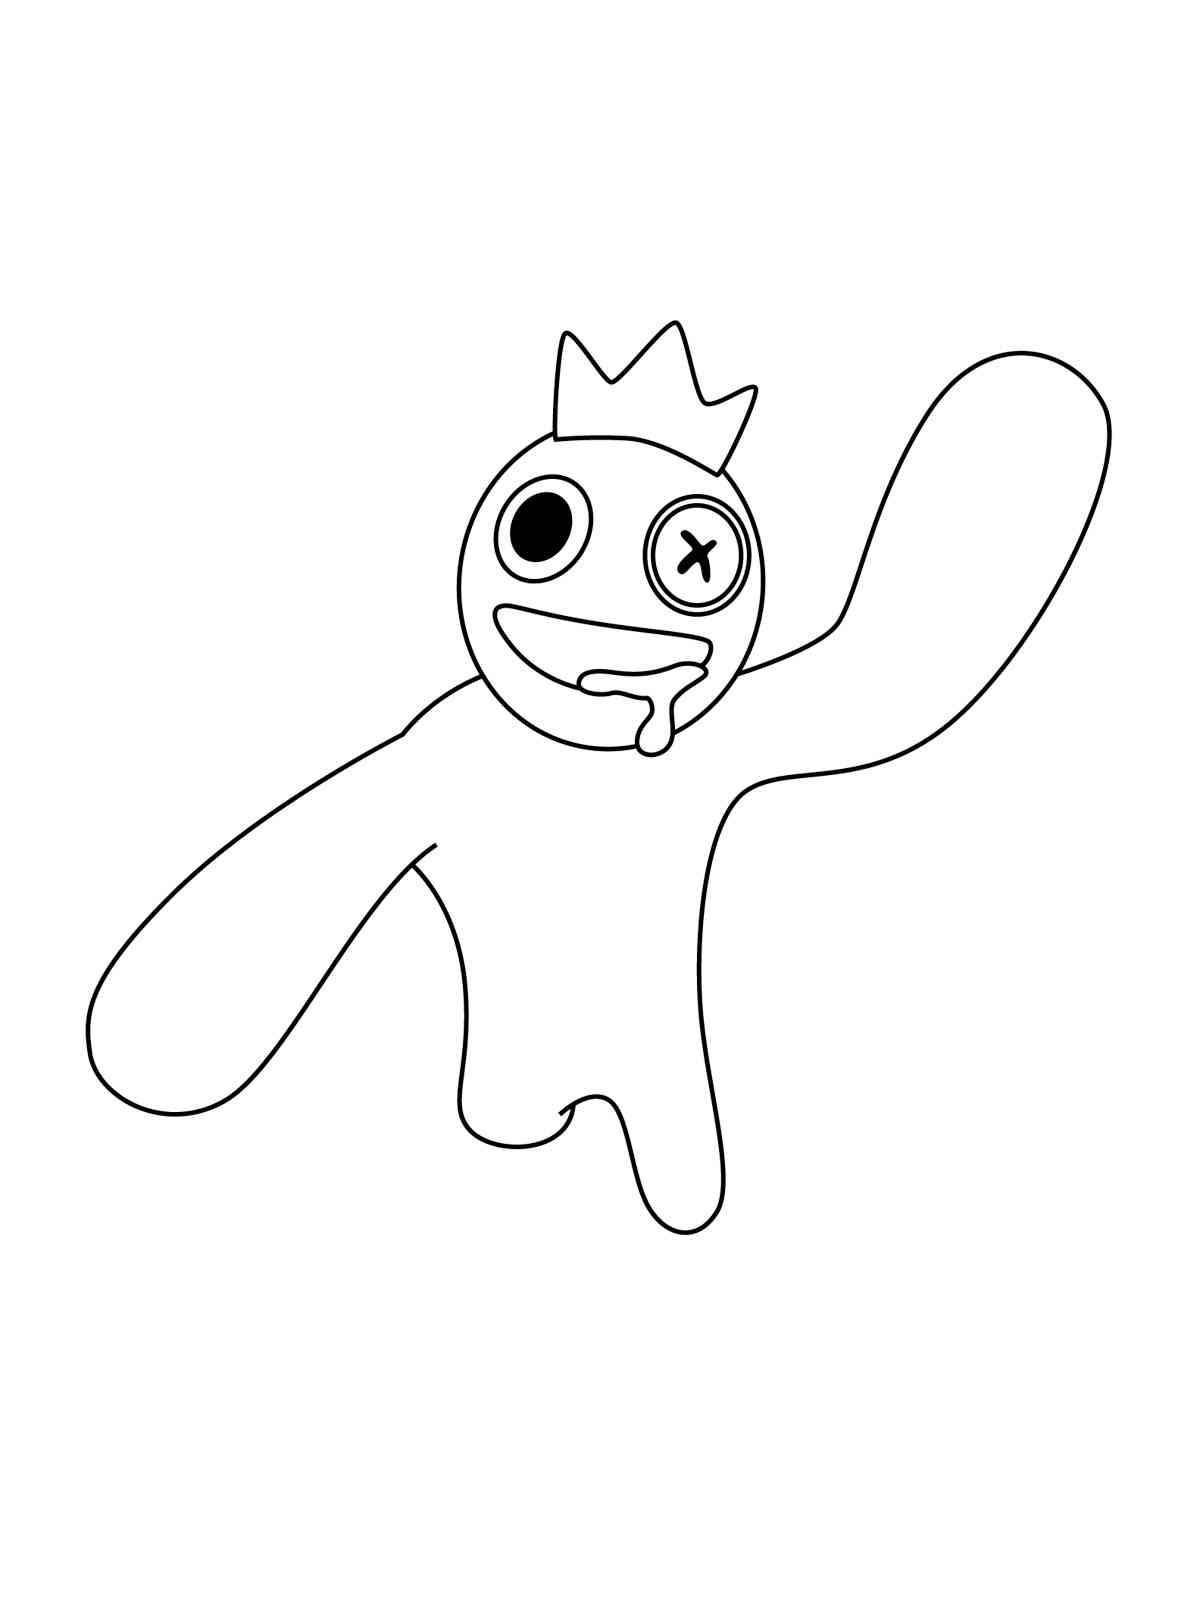 Coloring page enthusiastic rainbow friends